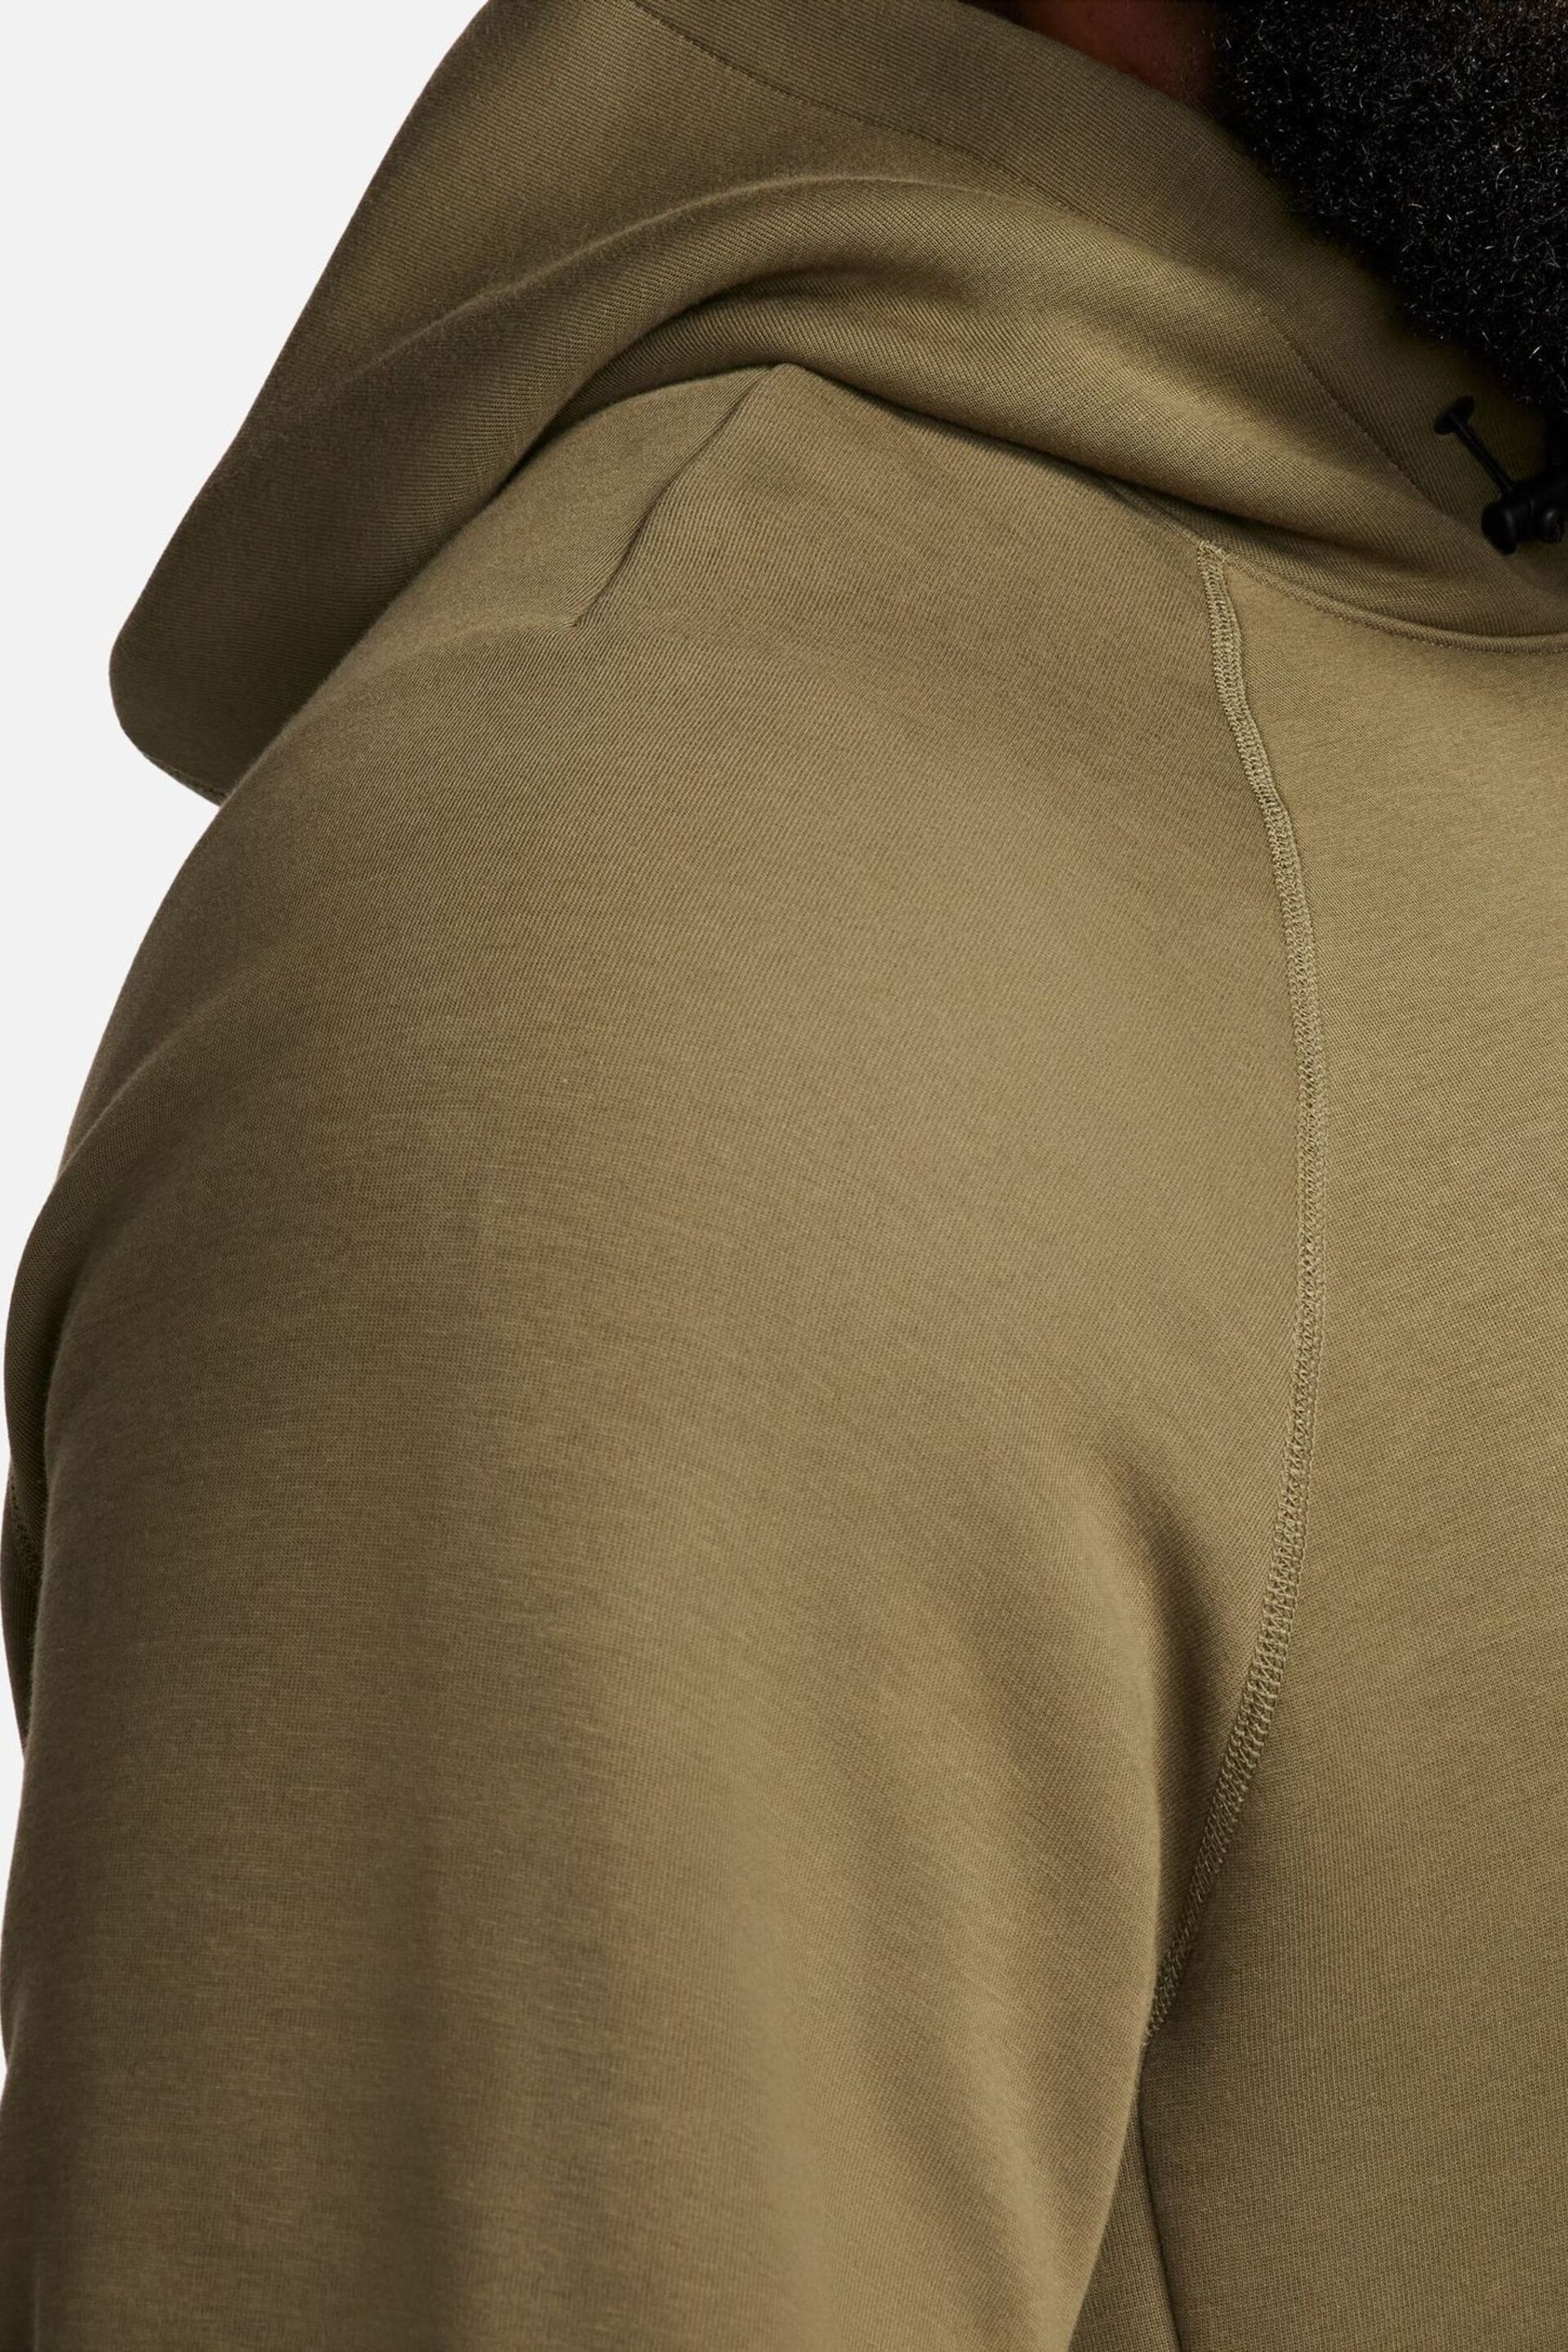 Nike Olive Green Tech Fleece Pullover Hoodie - Image 10 of 17